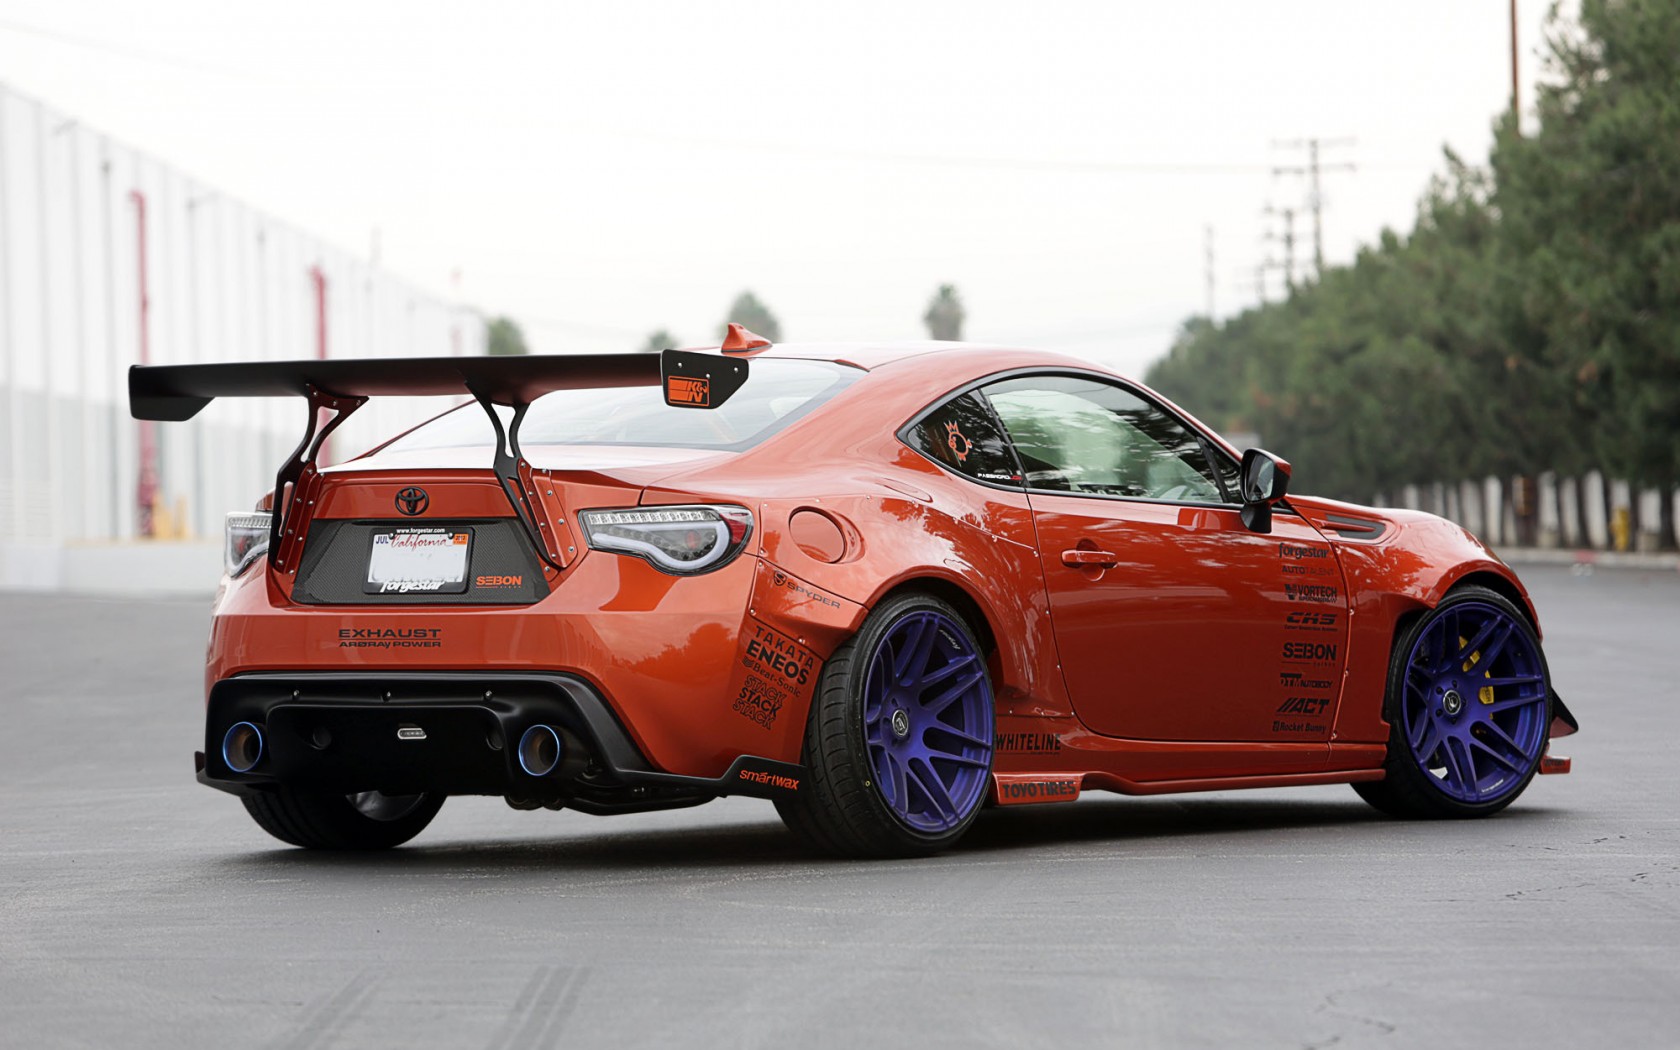 Toyota Scion Fr S Tuning Wallpaper Background